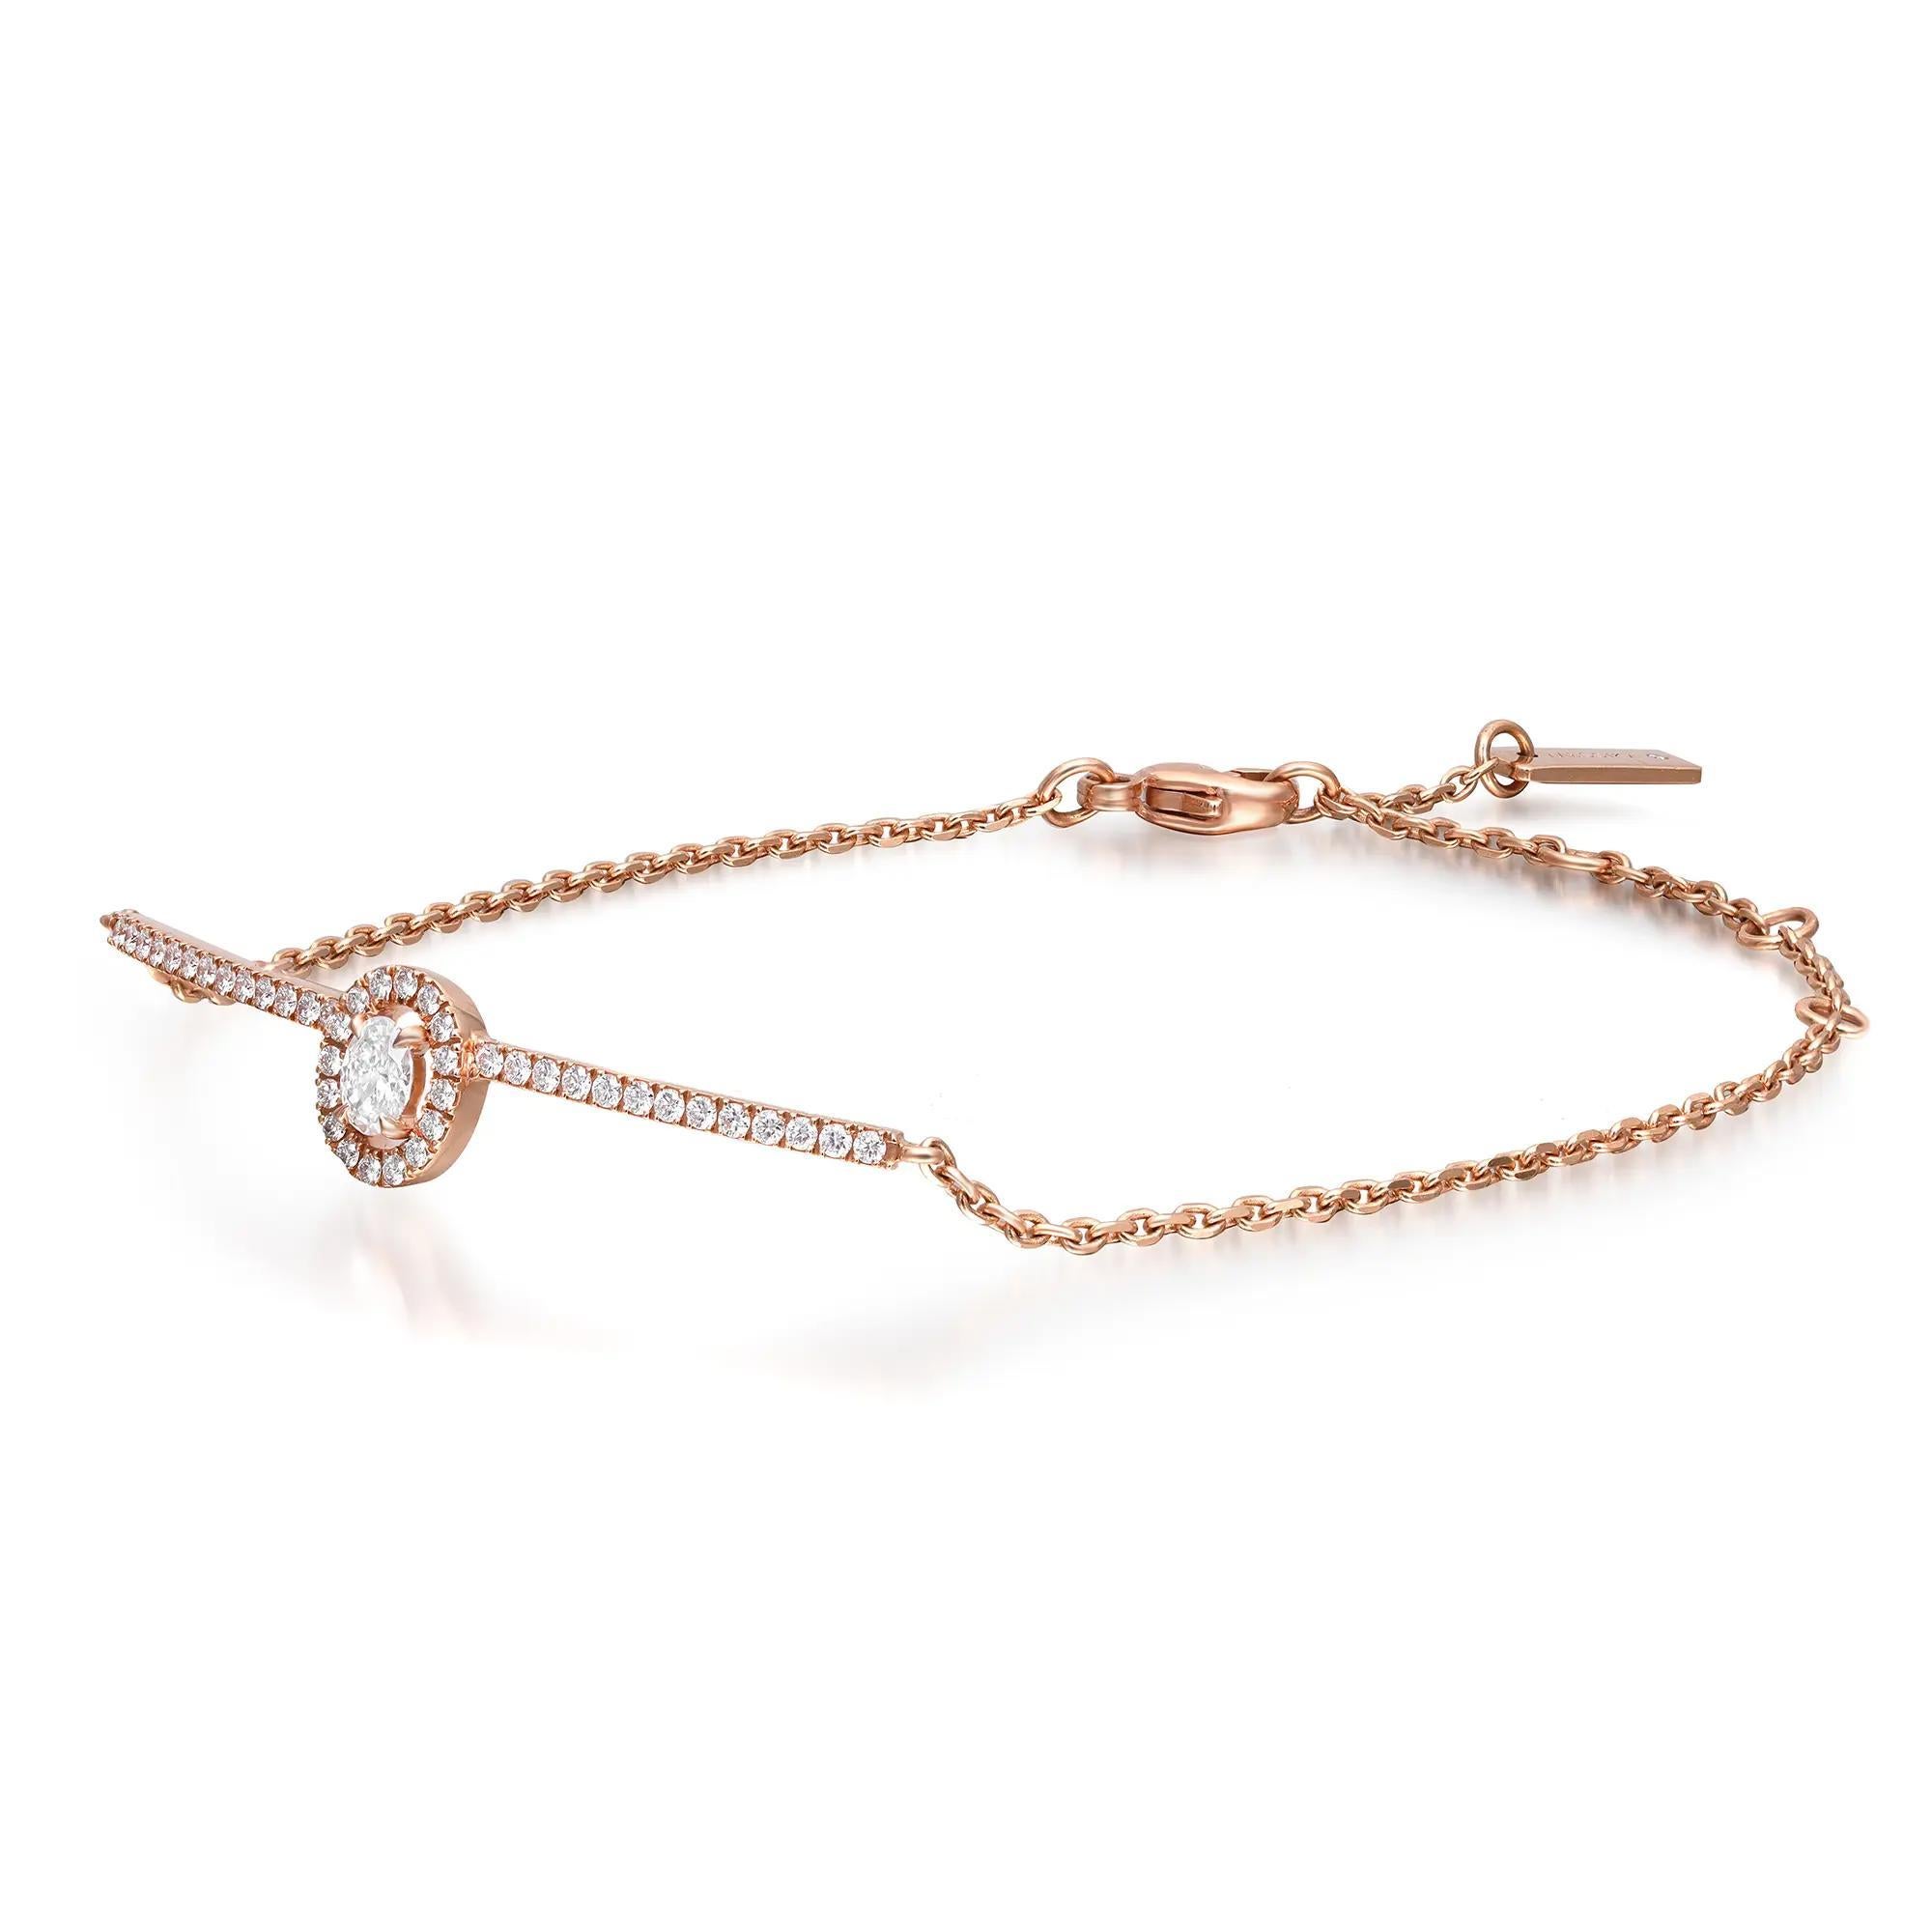 Modern Messika 0.36Cttw Glam'Azone Diamond Chain Bracelet 18K Rose Gold 7.5 Inches For Sale